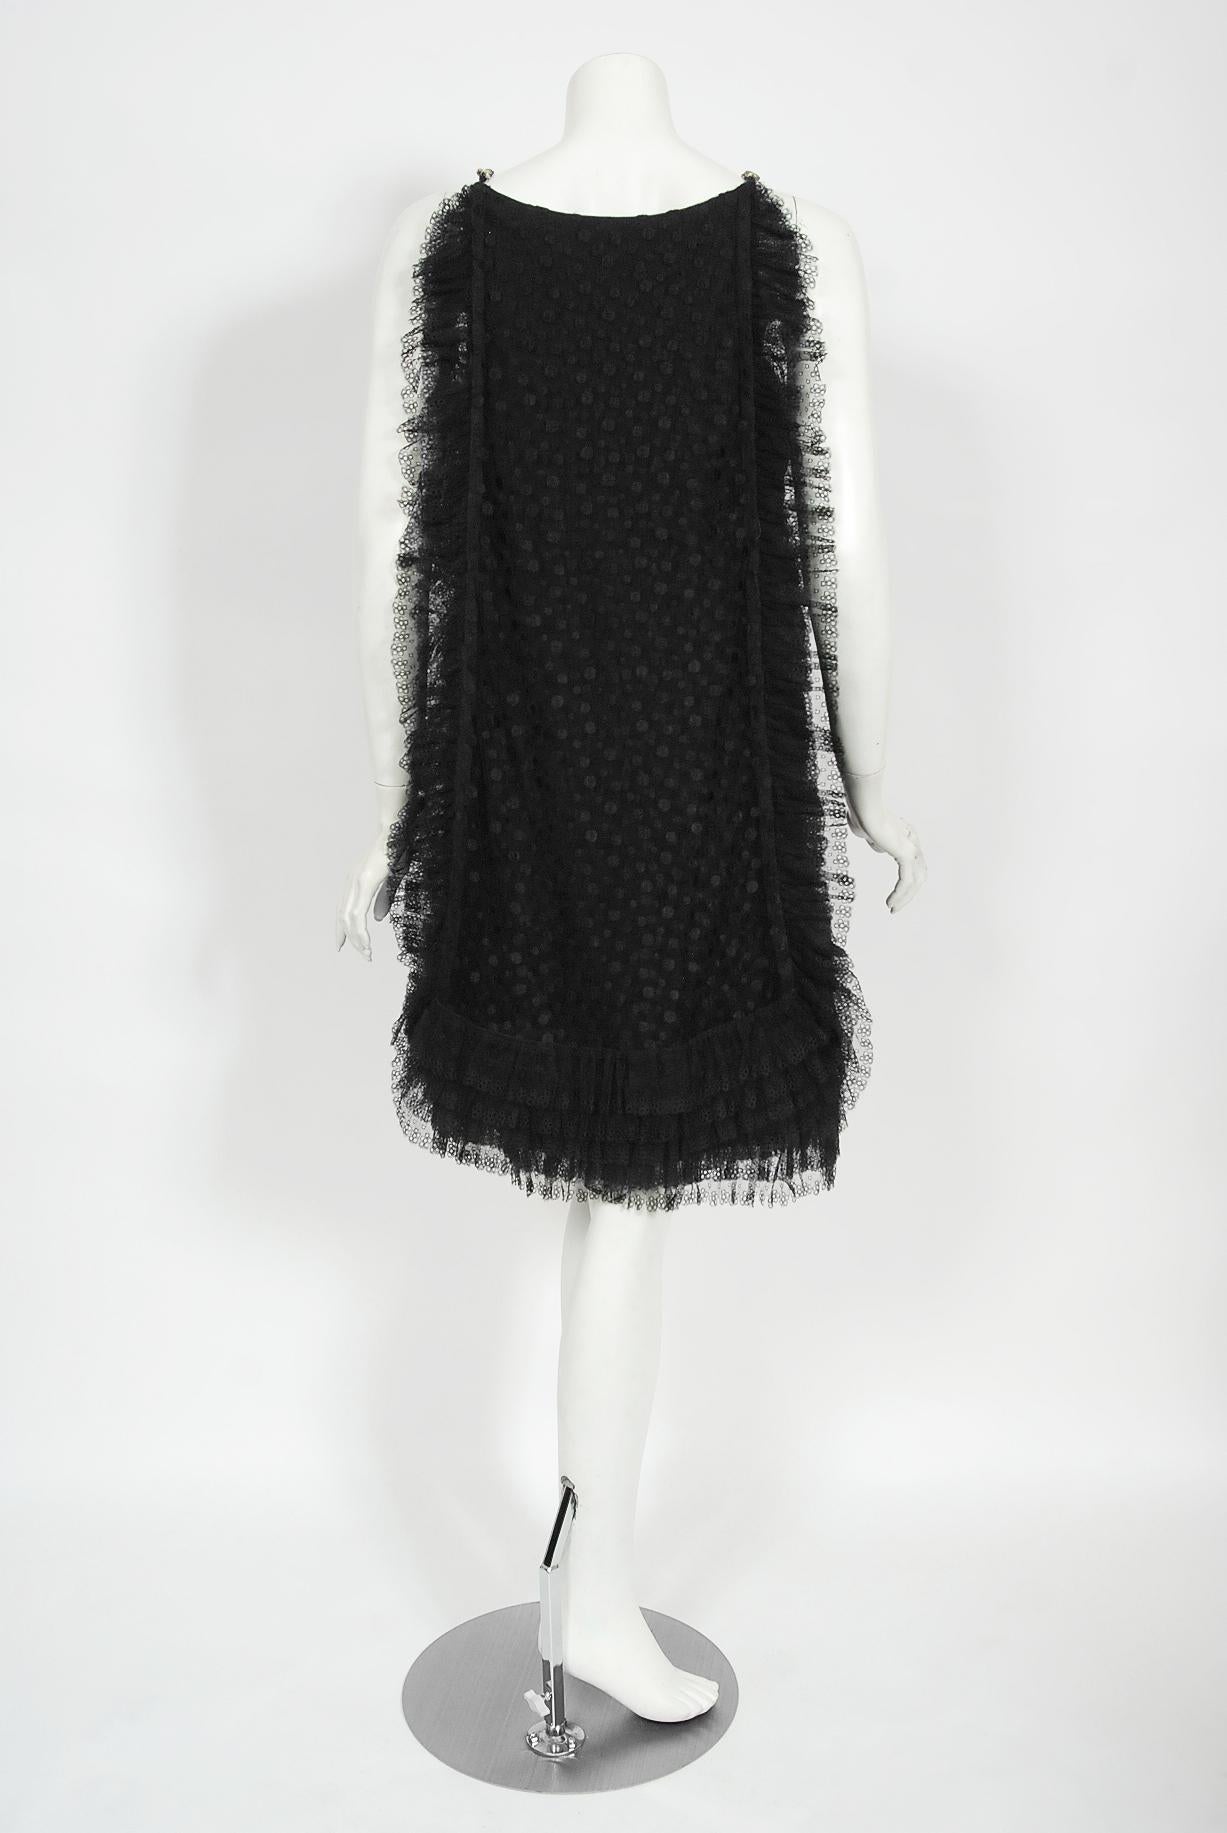 Vintage 1967 Galanos Couture Documented Black Polka-Dot Lace Mod Cocktail Dress 8